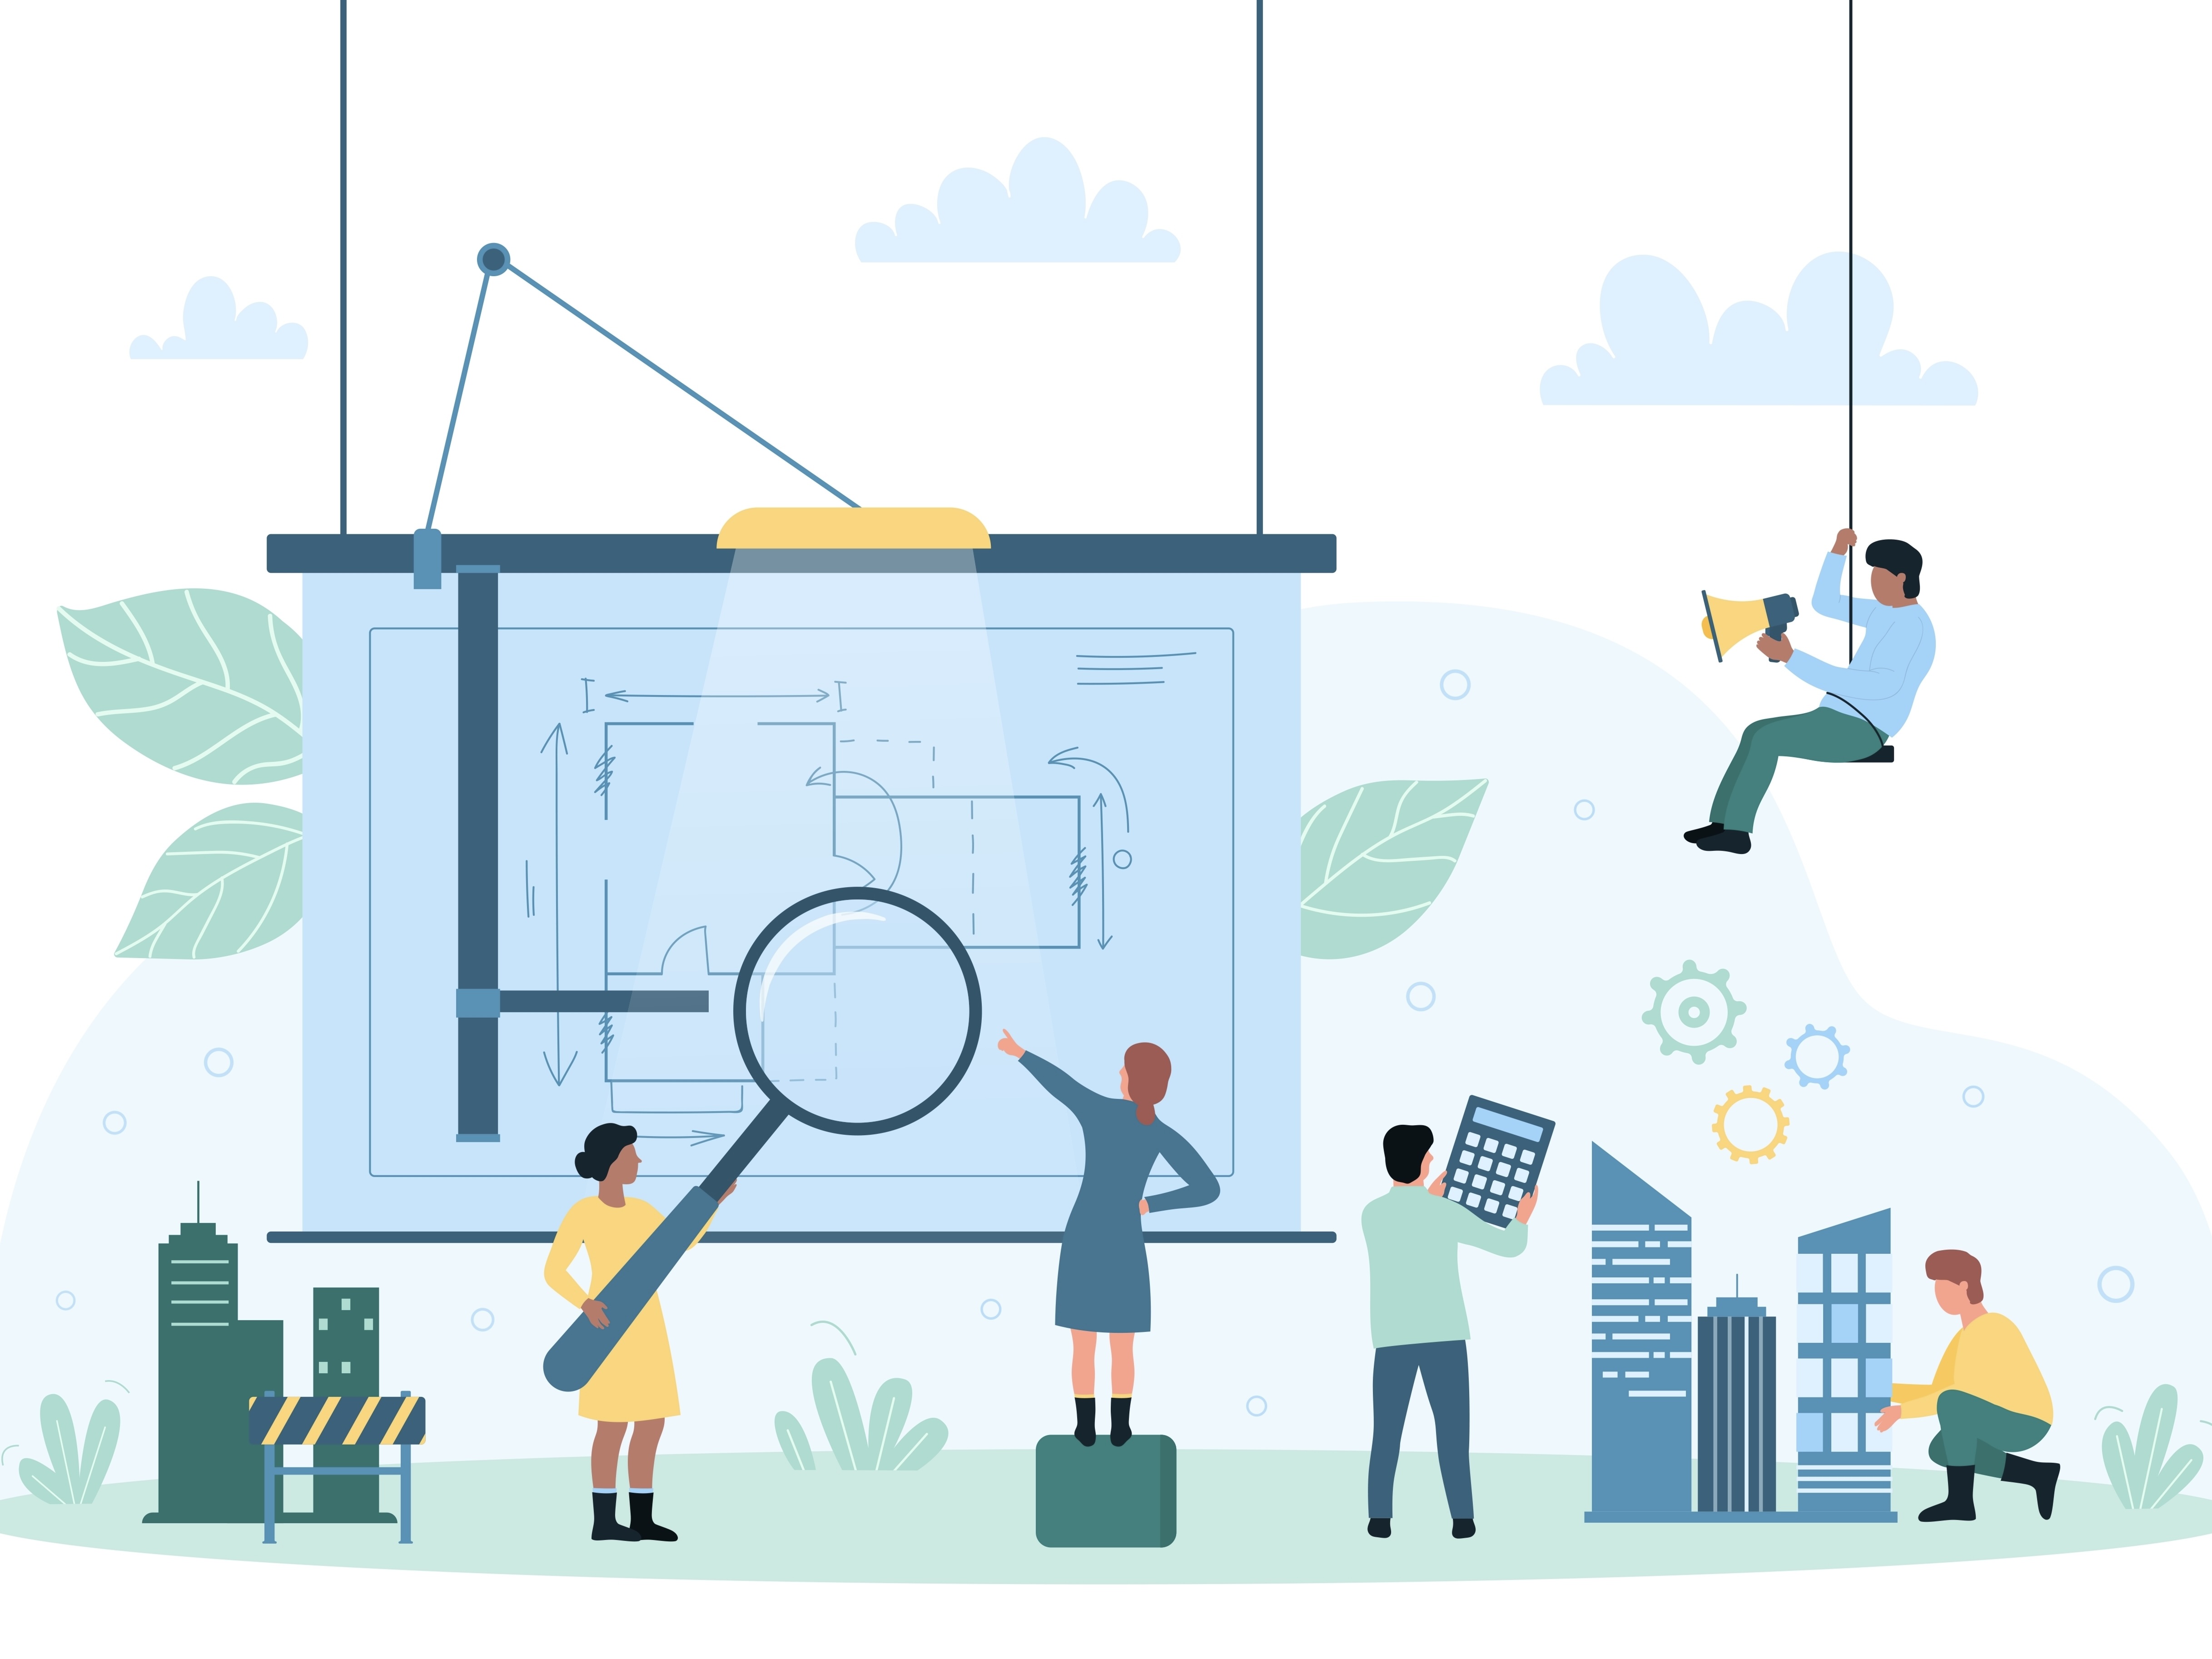  An illustration of employees referencing an oversized blueprint while building a miniature city.